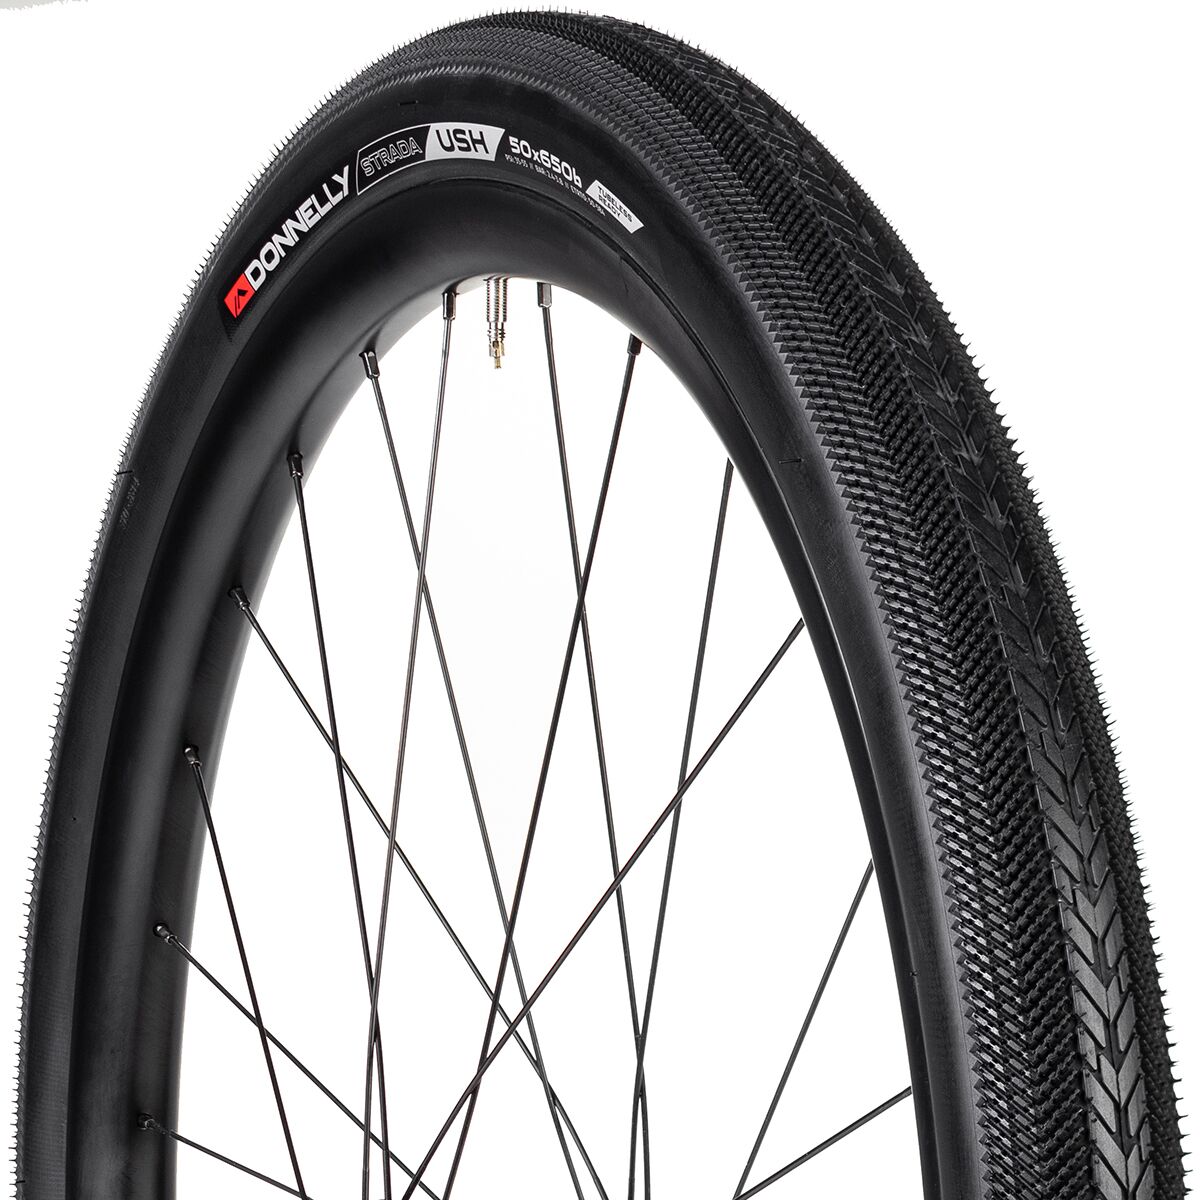 Donnelly Strada USH 650b Tubeless Tire